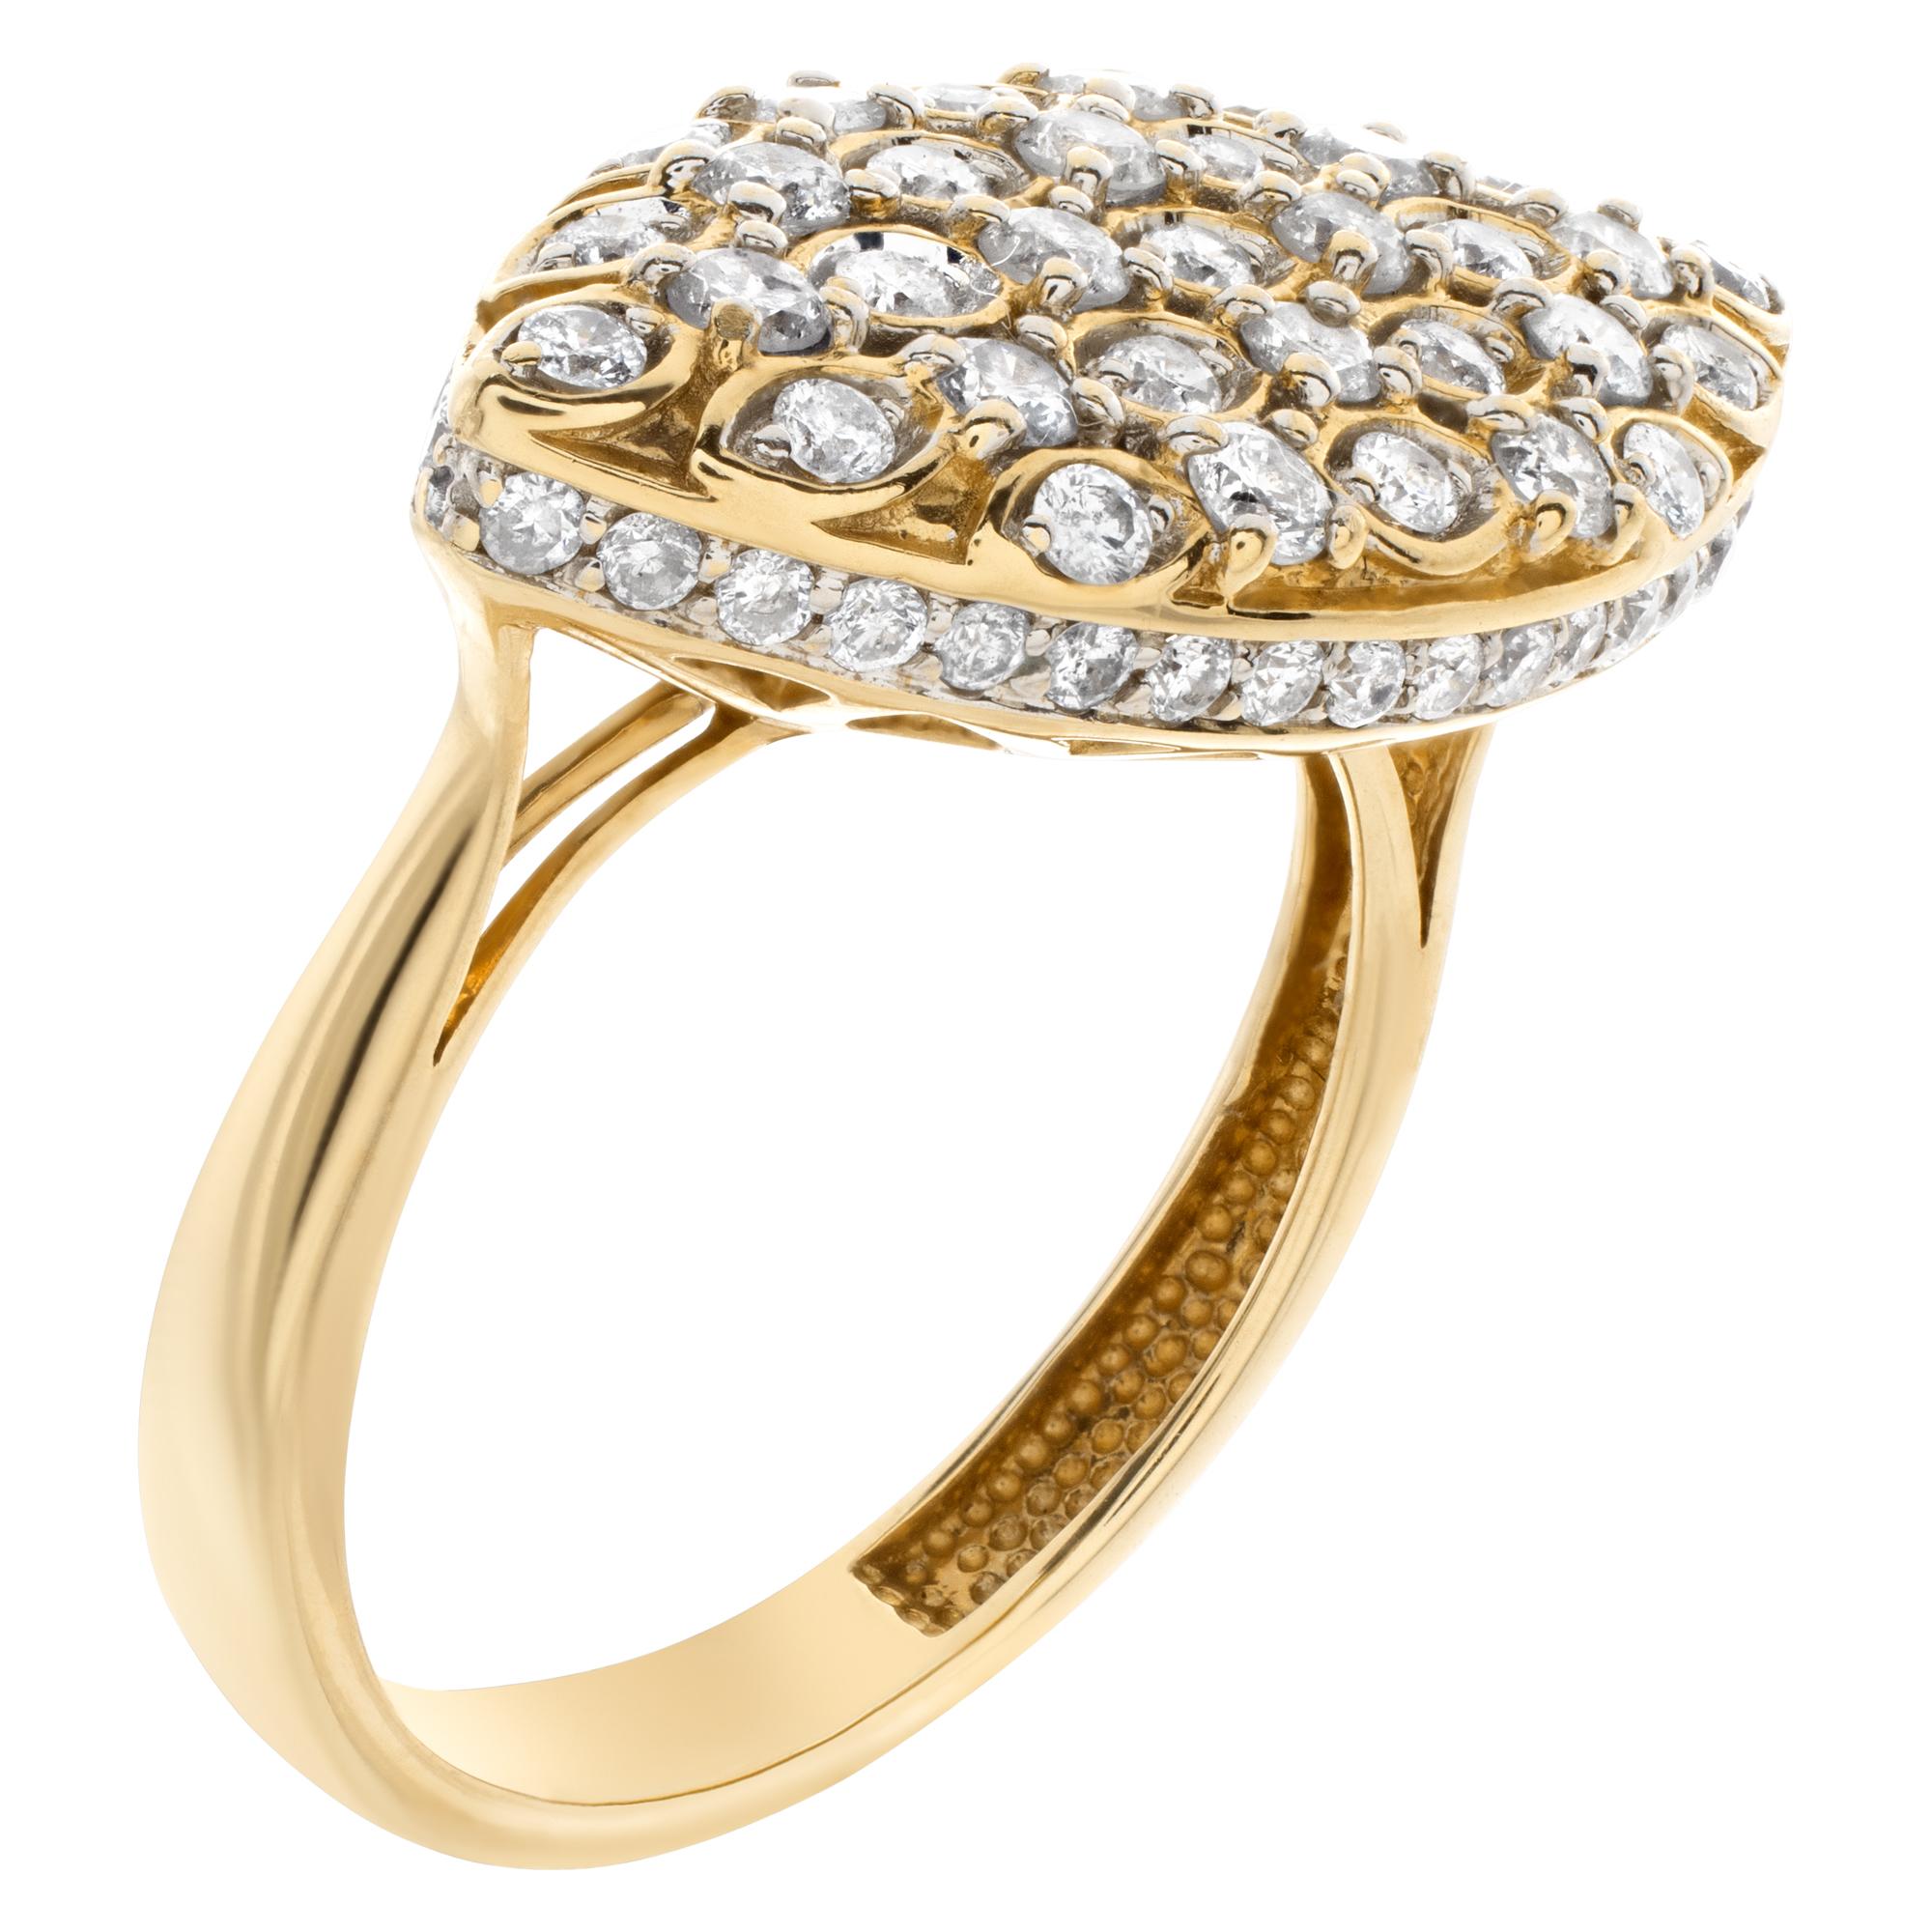 Women's Oval Diamond ring in 14k yellow gold. 0.93 carats in pave set diamonds.  For Sale